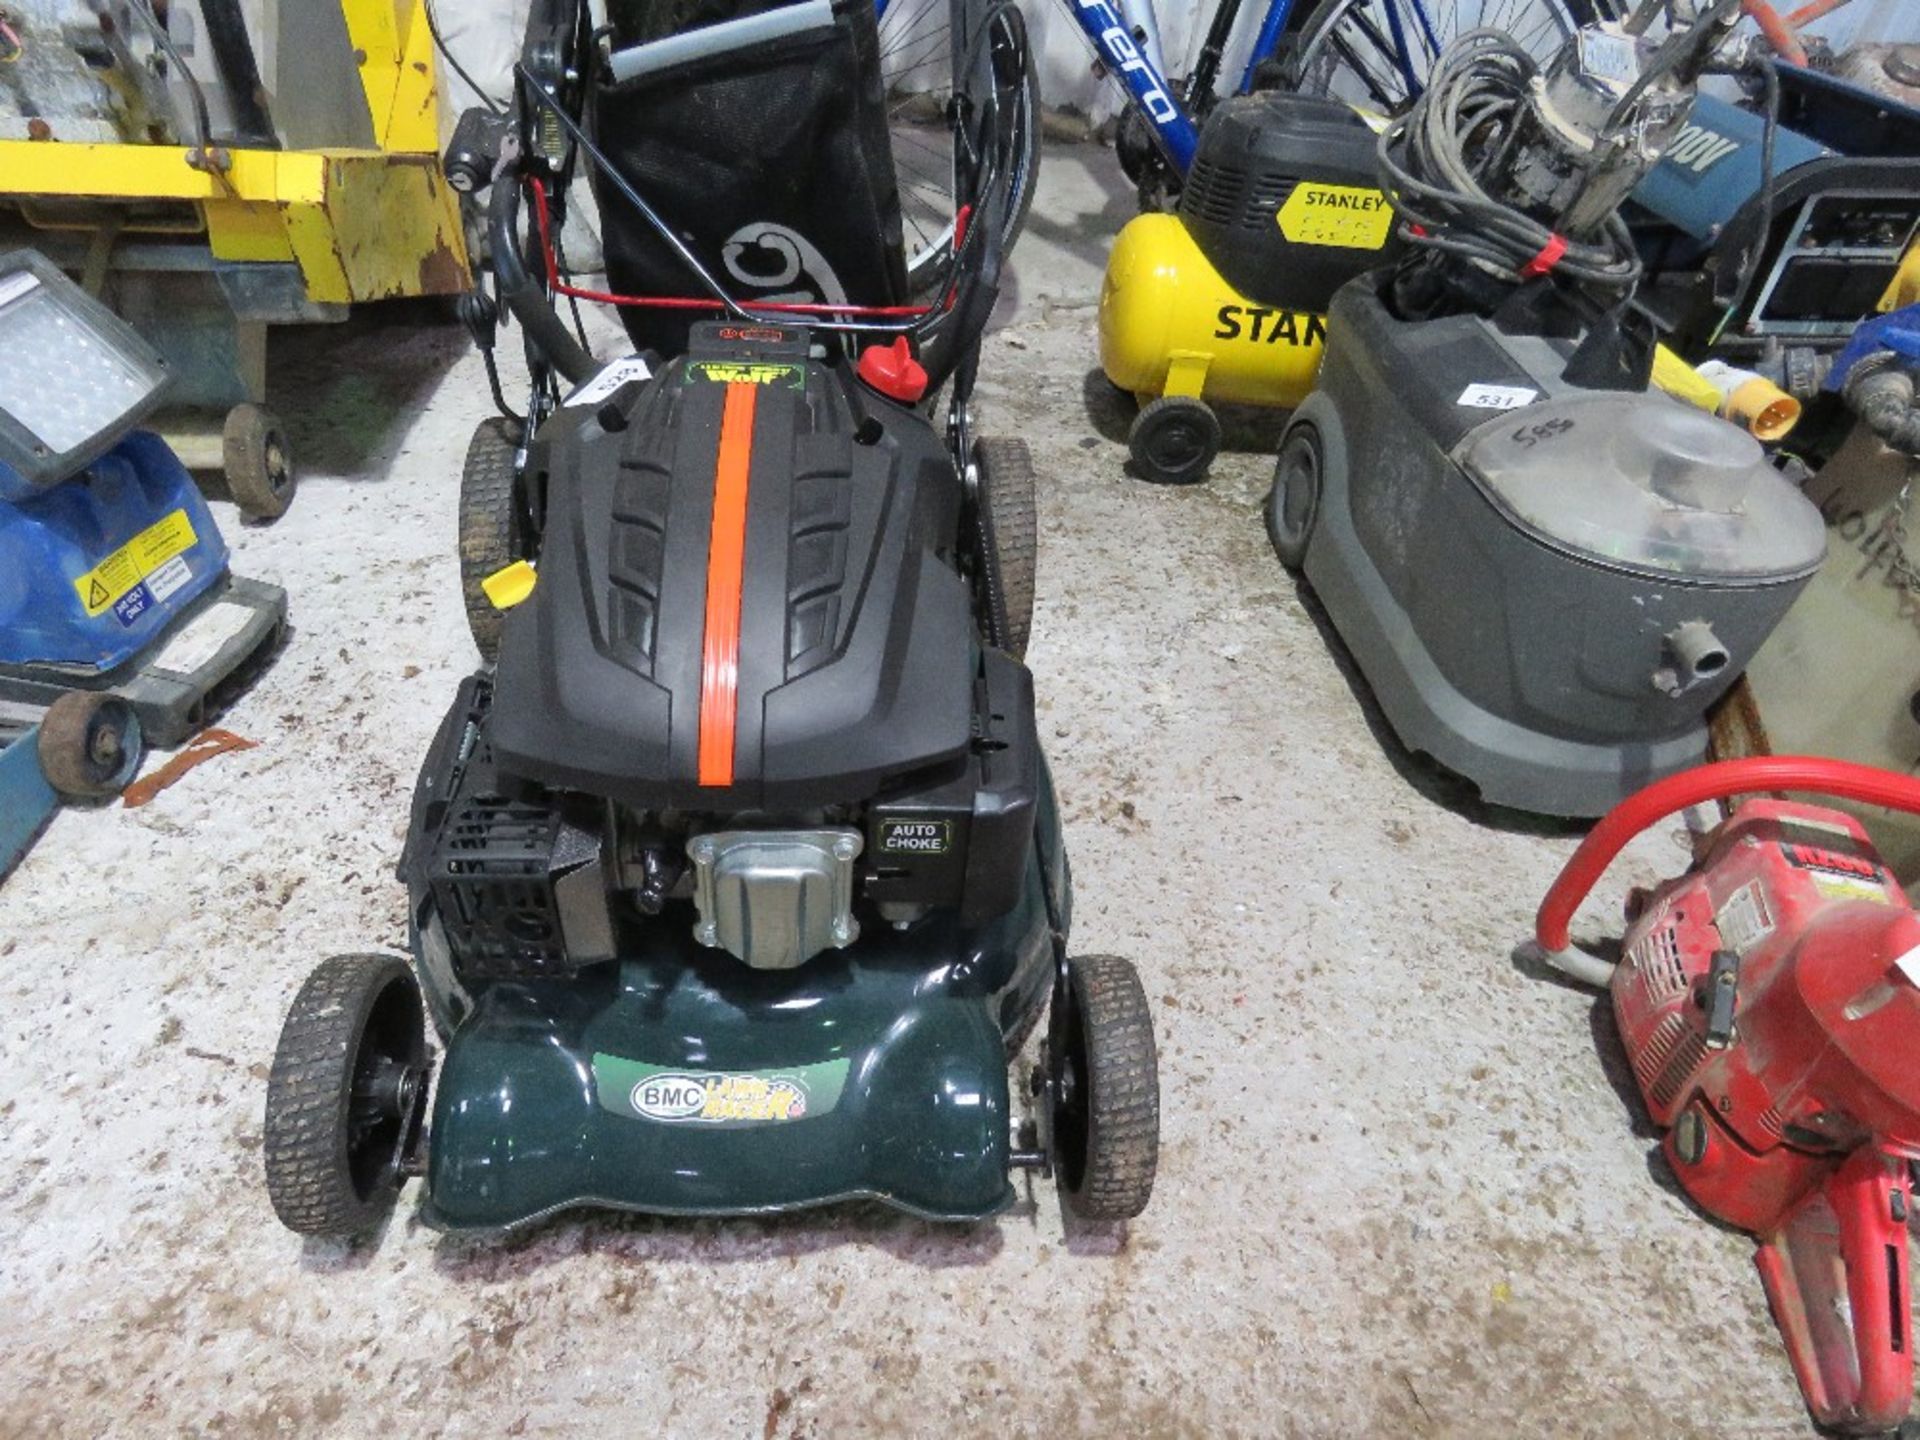 WOLF PETROL ENGINED MOWER WITH BATTERY POWERED STARTER.....THIS LOT IS SOLD UNDER THE AUCTIONEERS MA - Image 2 of 5